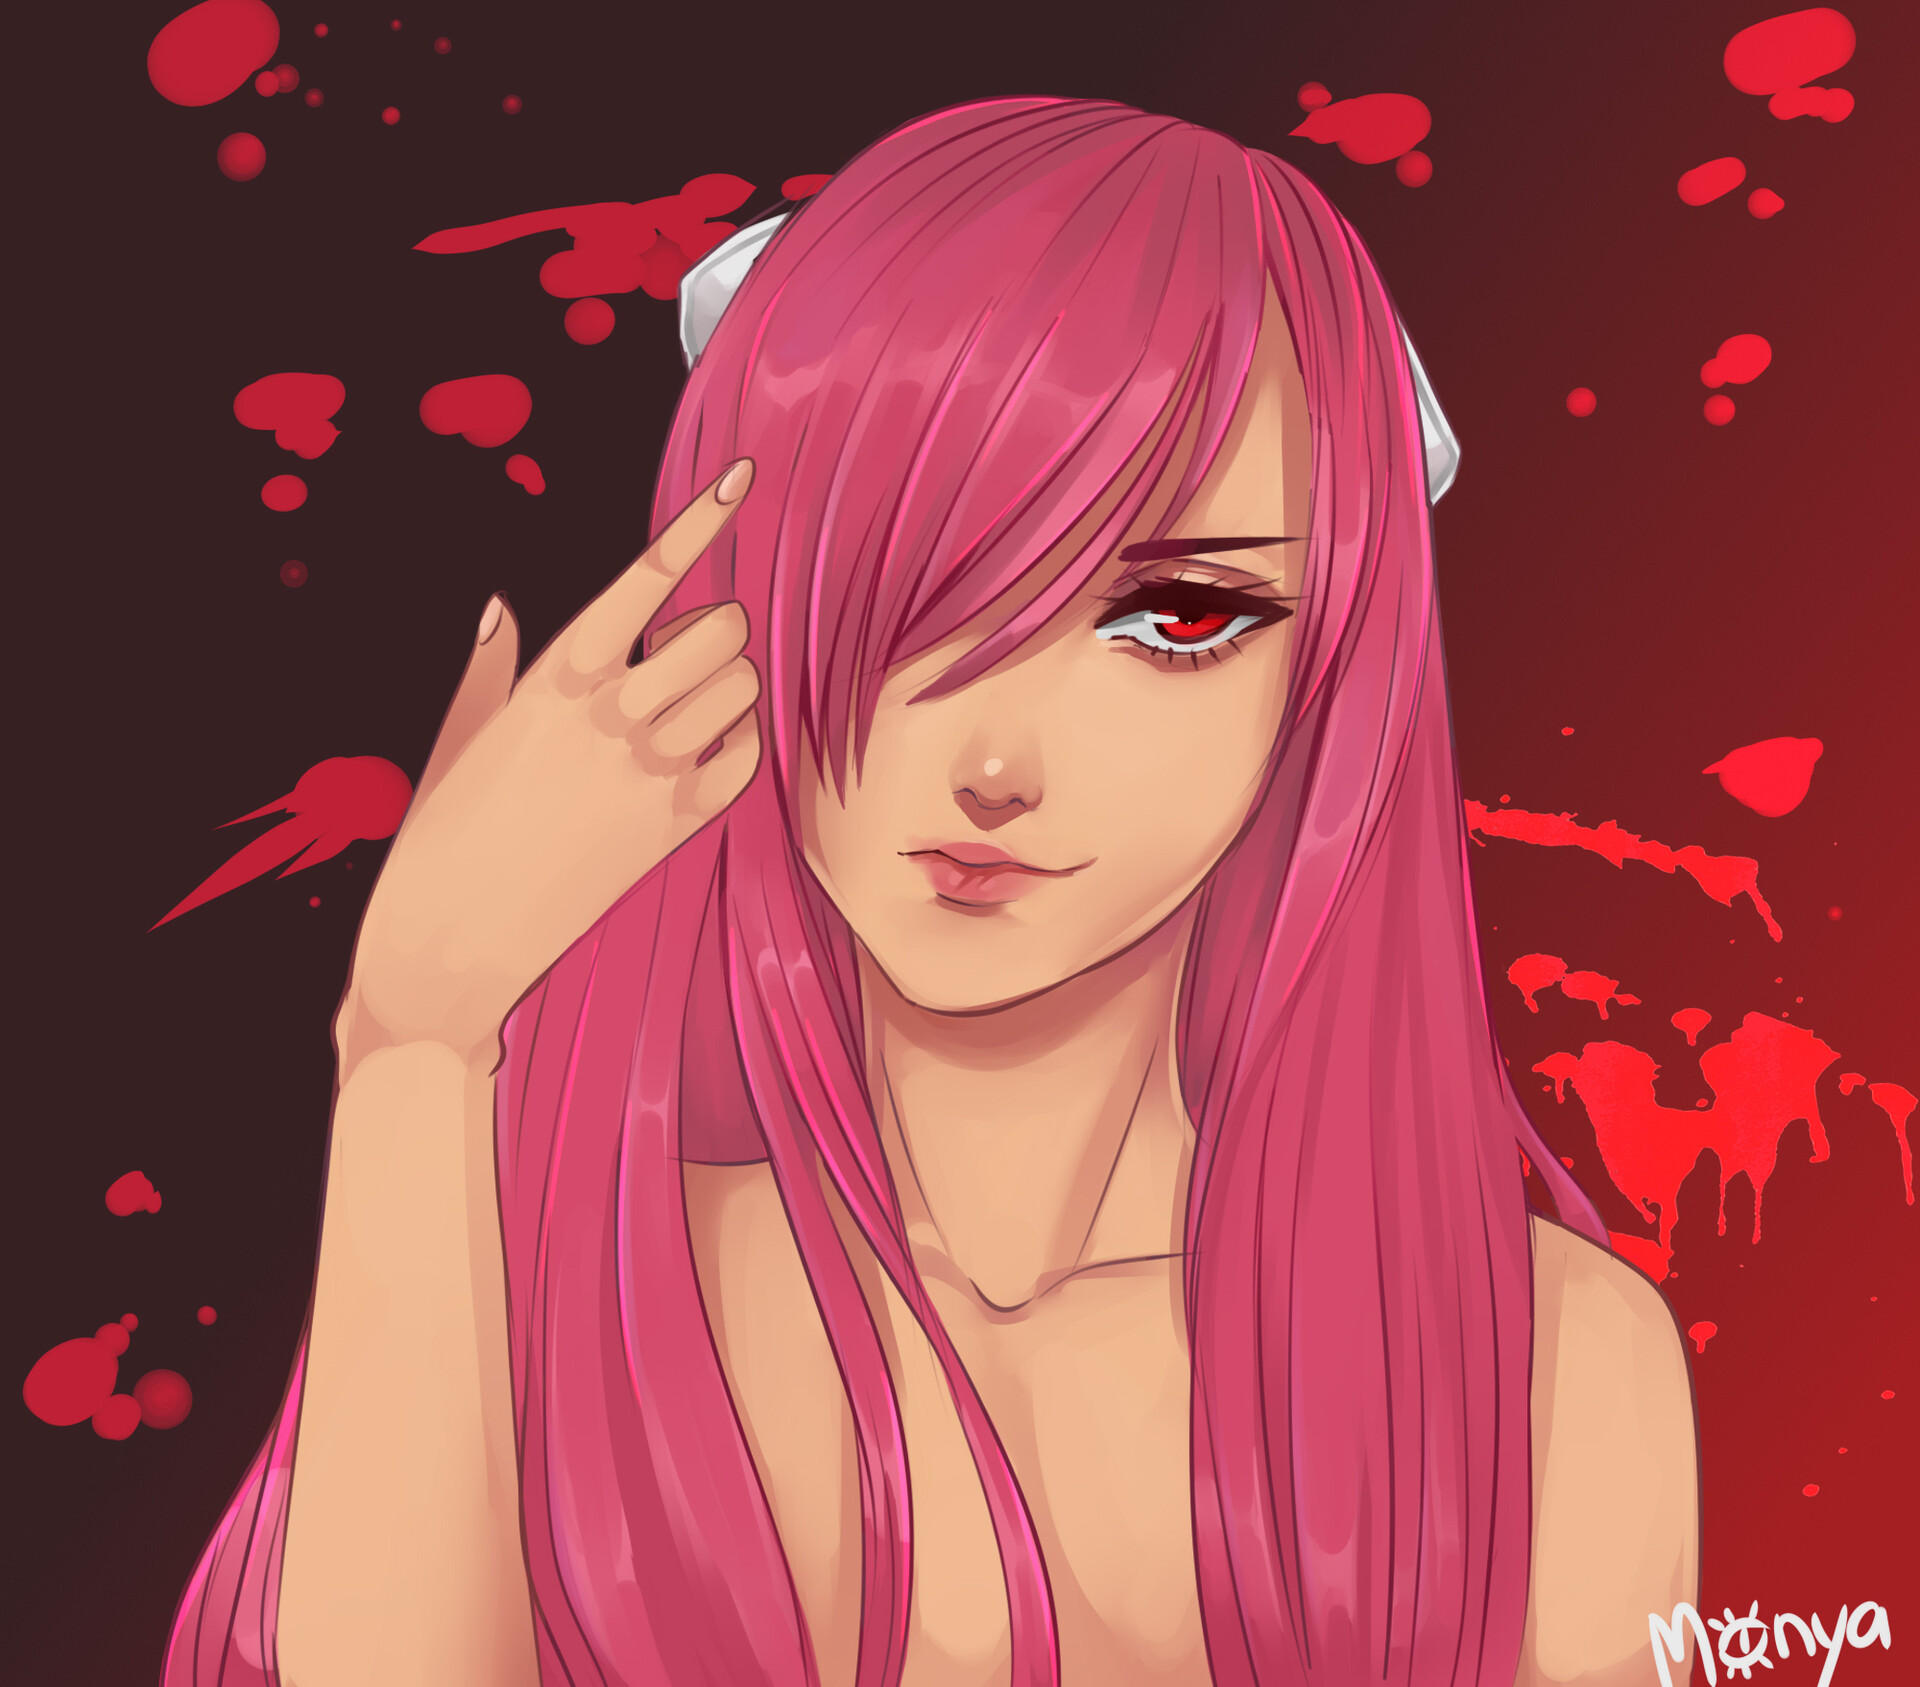 Lucy from Elfen Lied, Monya Chan.